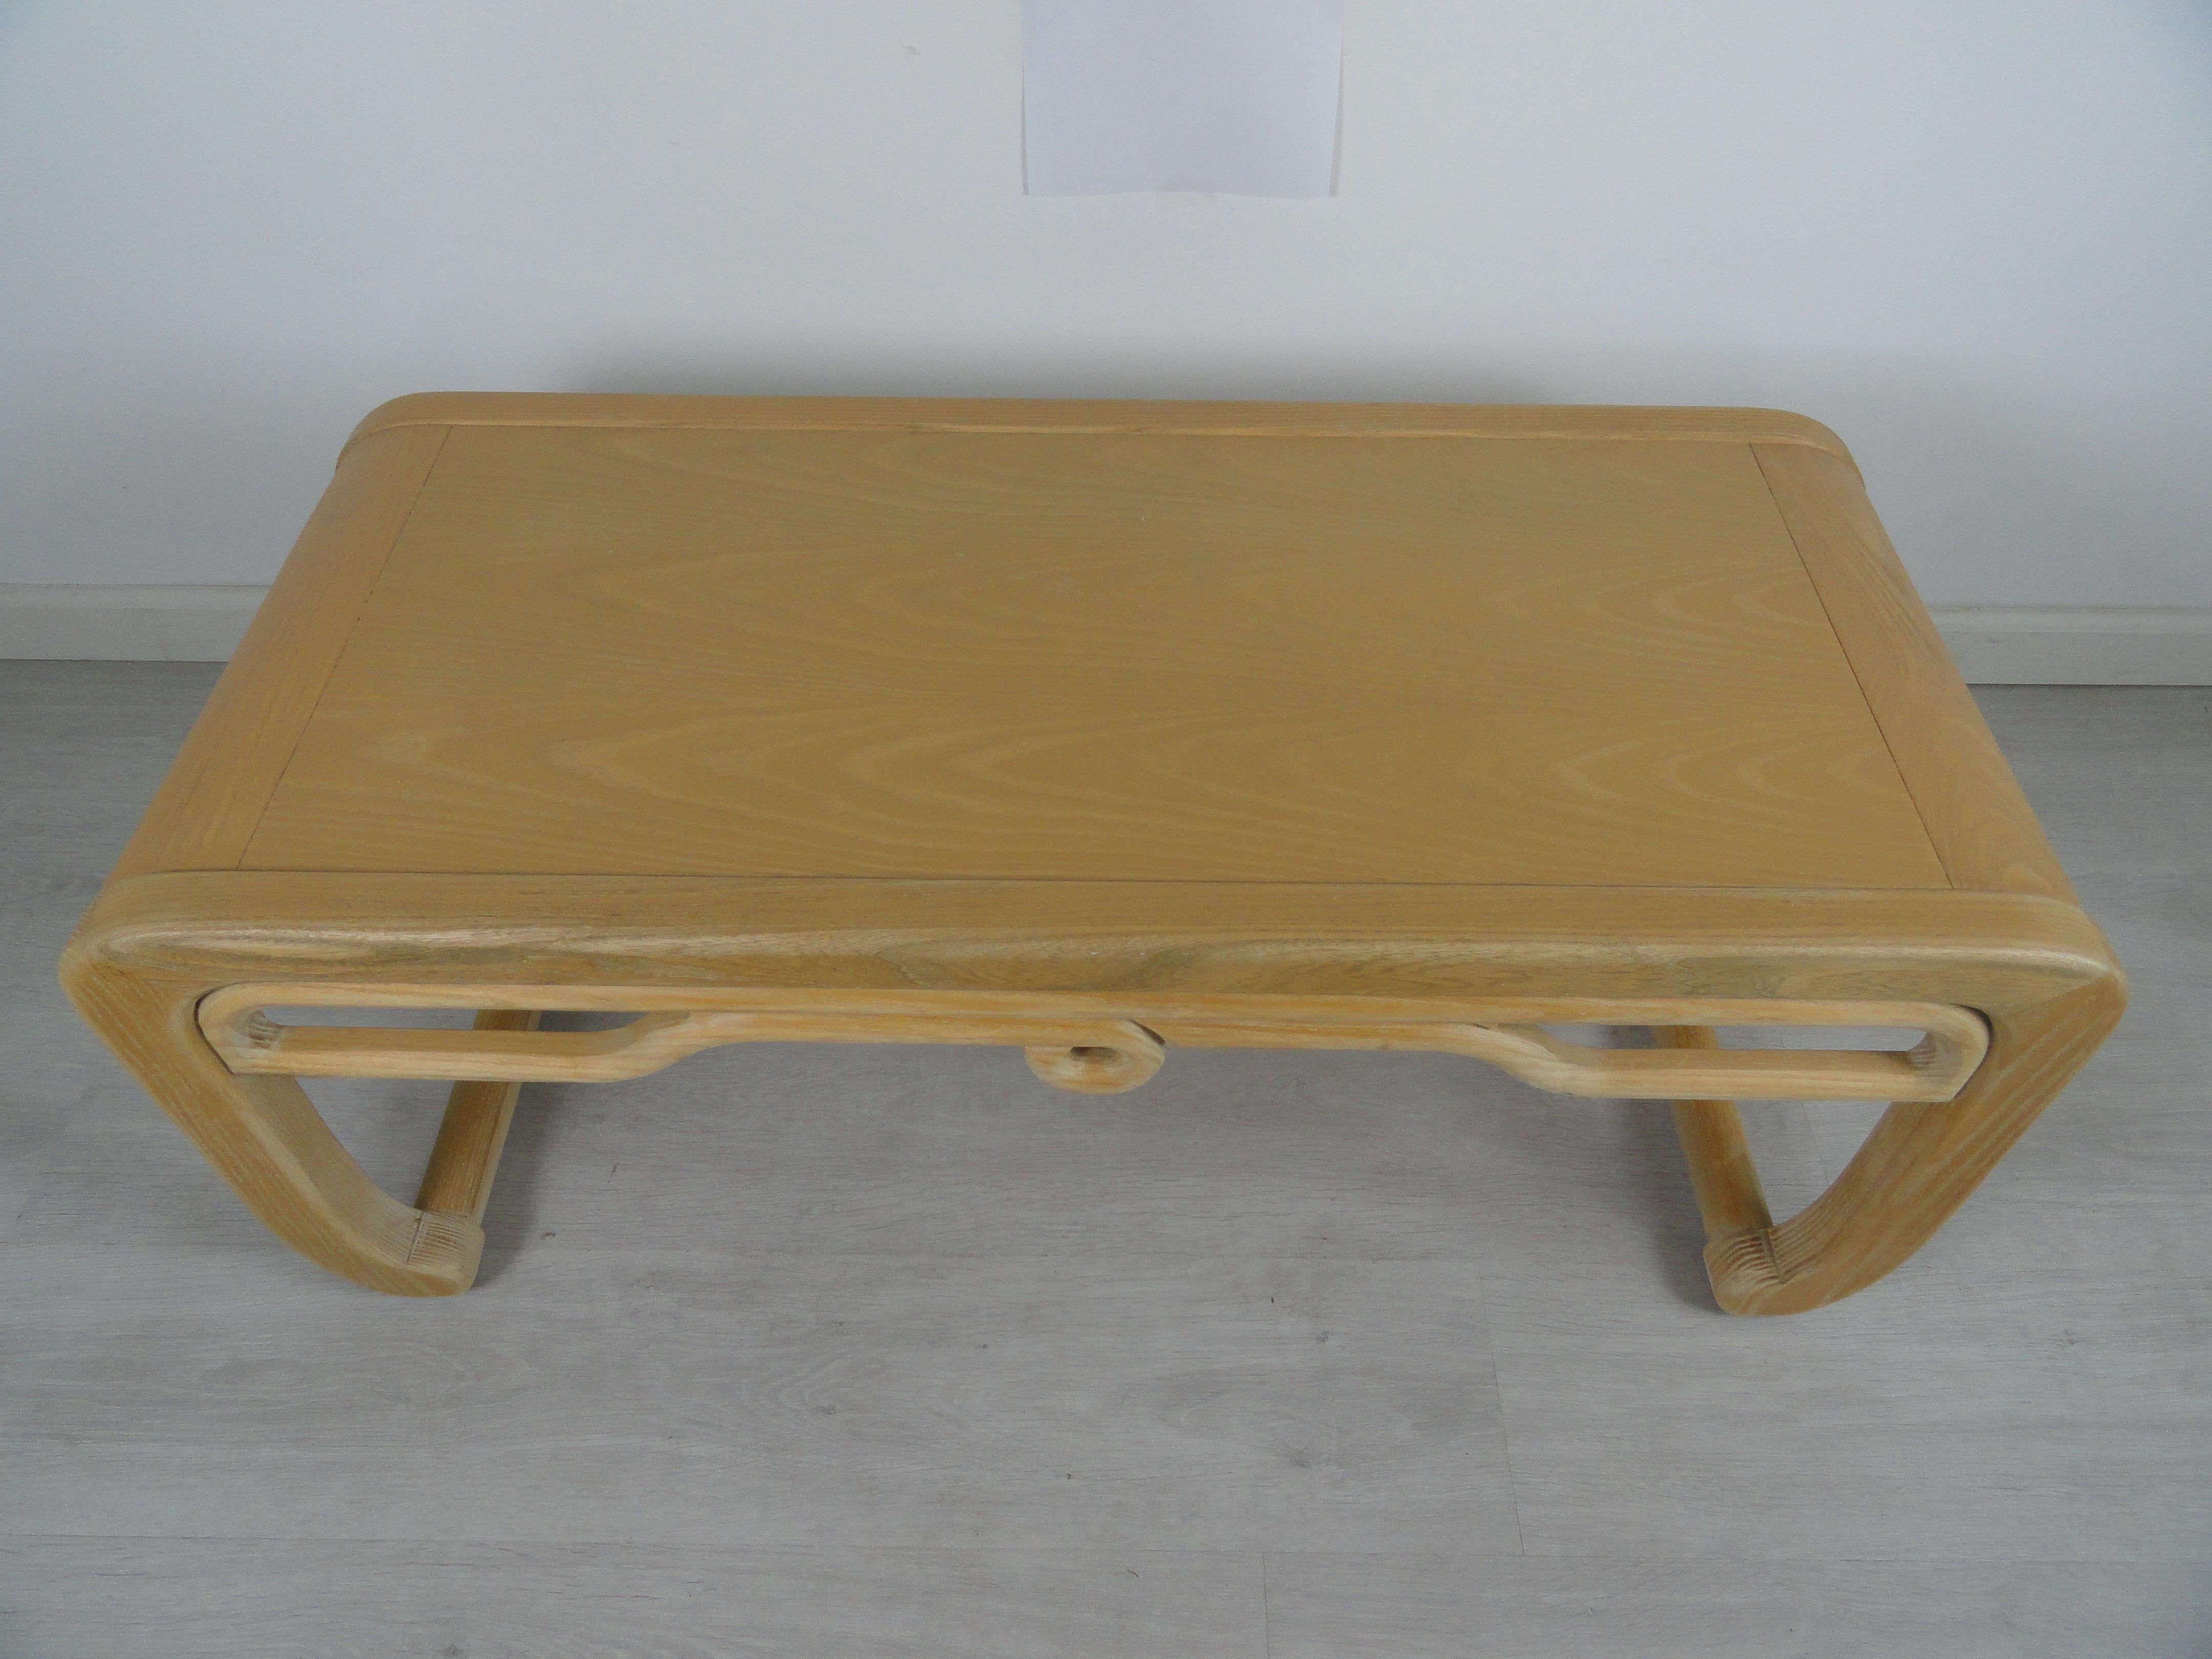 Rare Art Deco style Chinese coffee table in a light blonde wood.